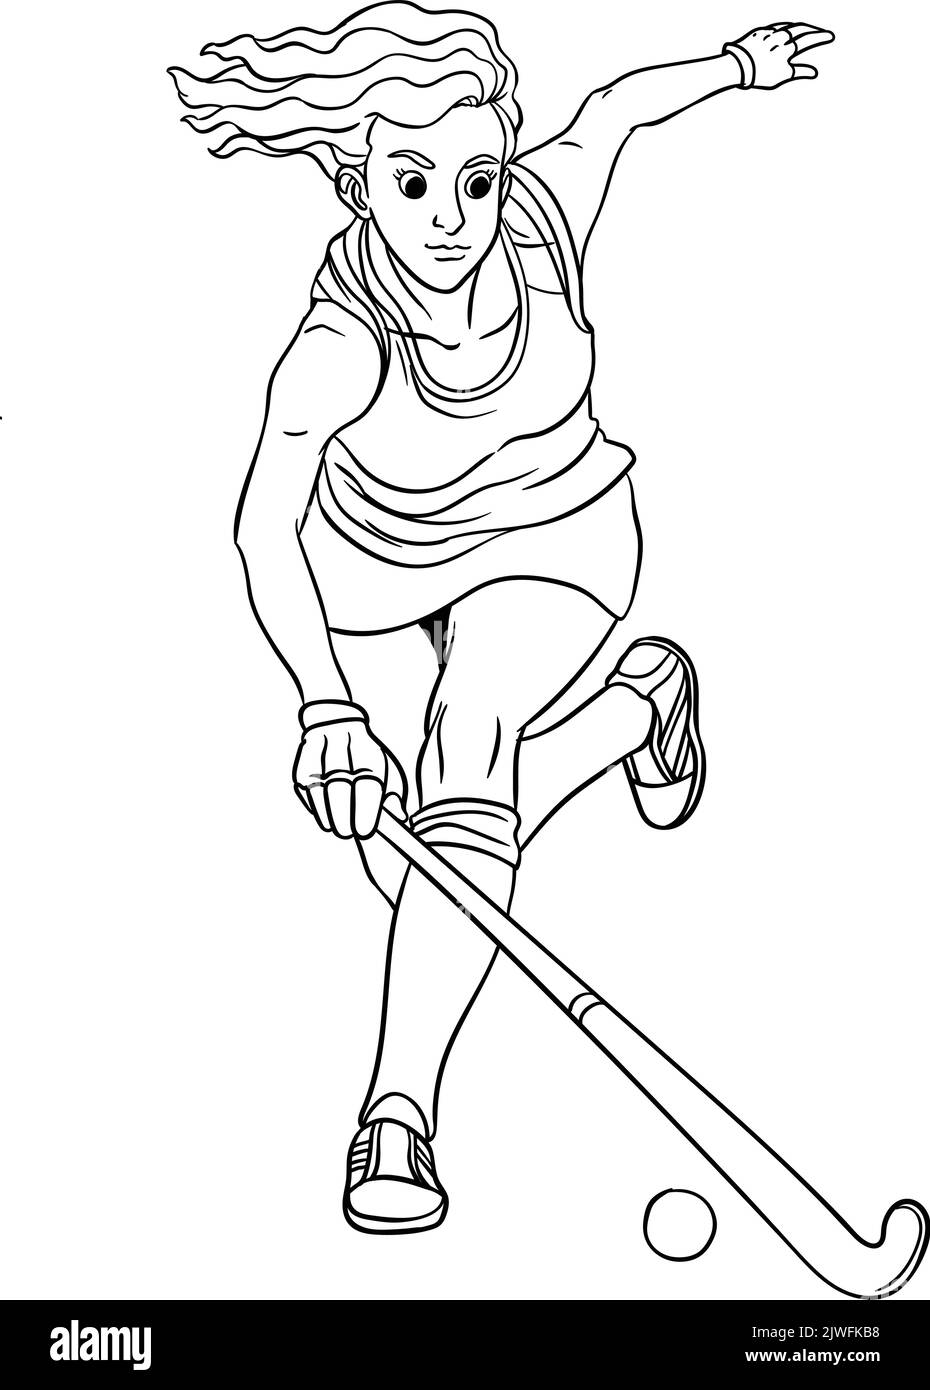 Field Hockey Isolated Coloring Page for Kids Stock Vector Image & Art ...